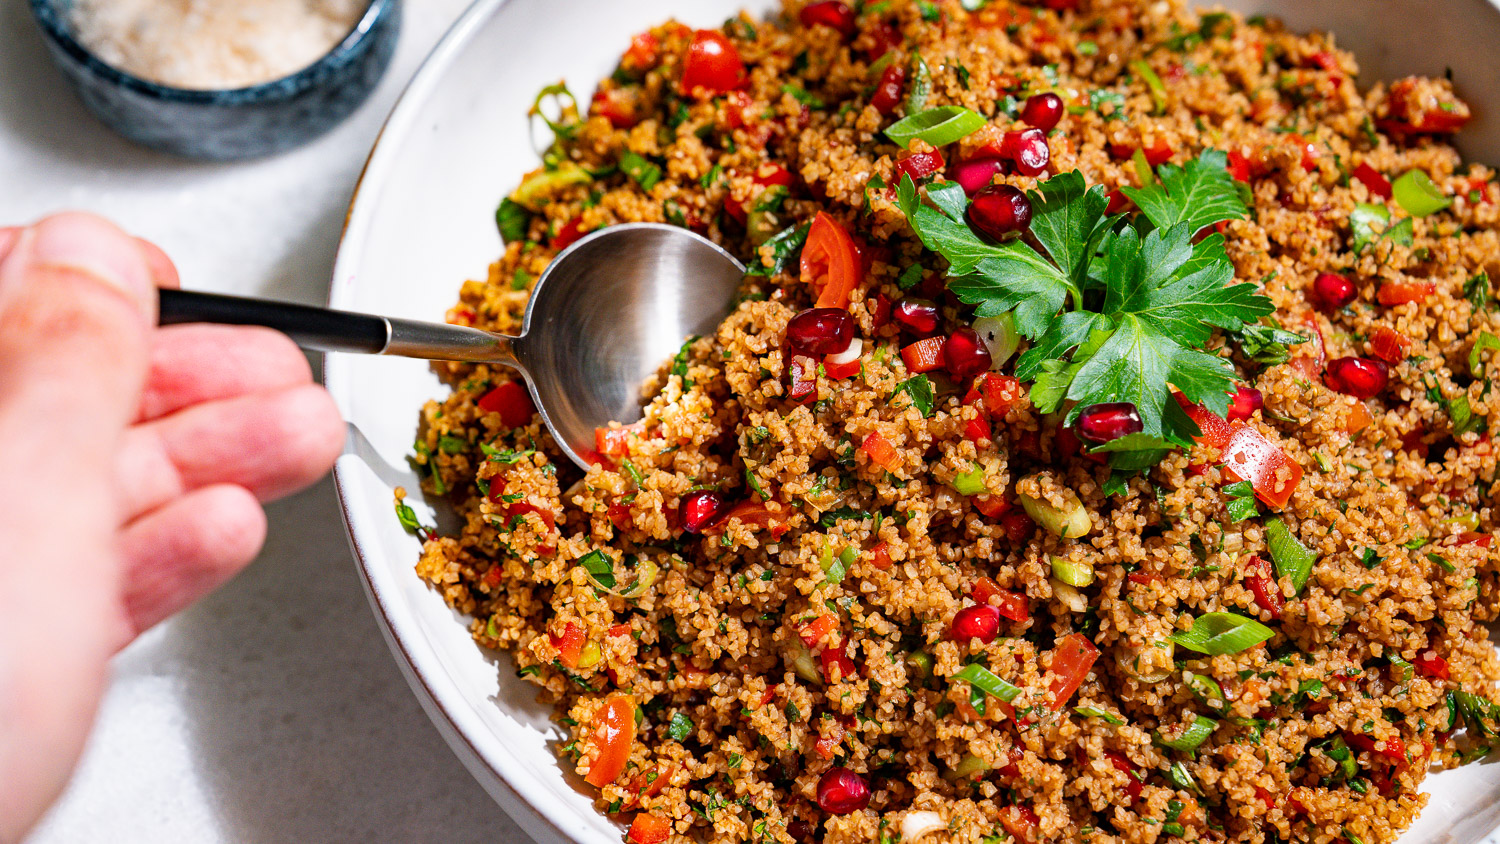 One hand is helping itself with a spoon from a bowl of kisir - Turkish bulgur salad.